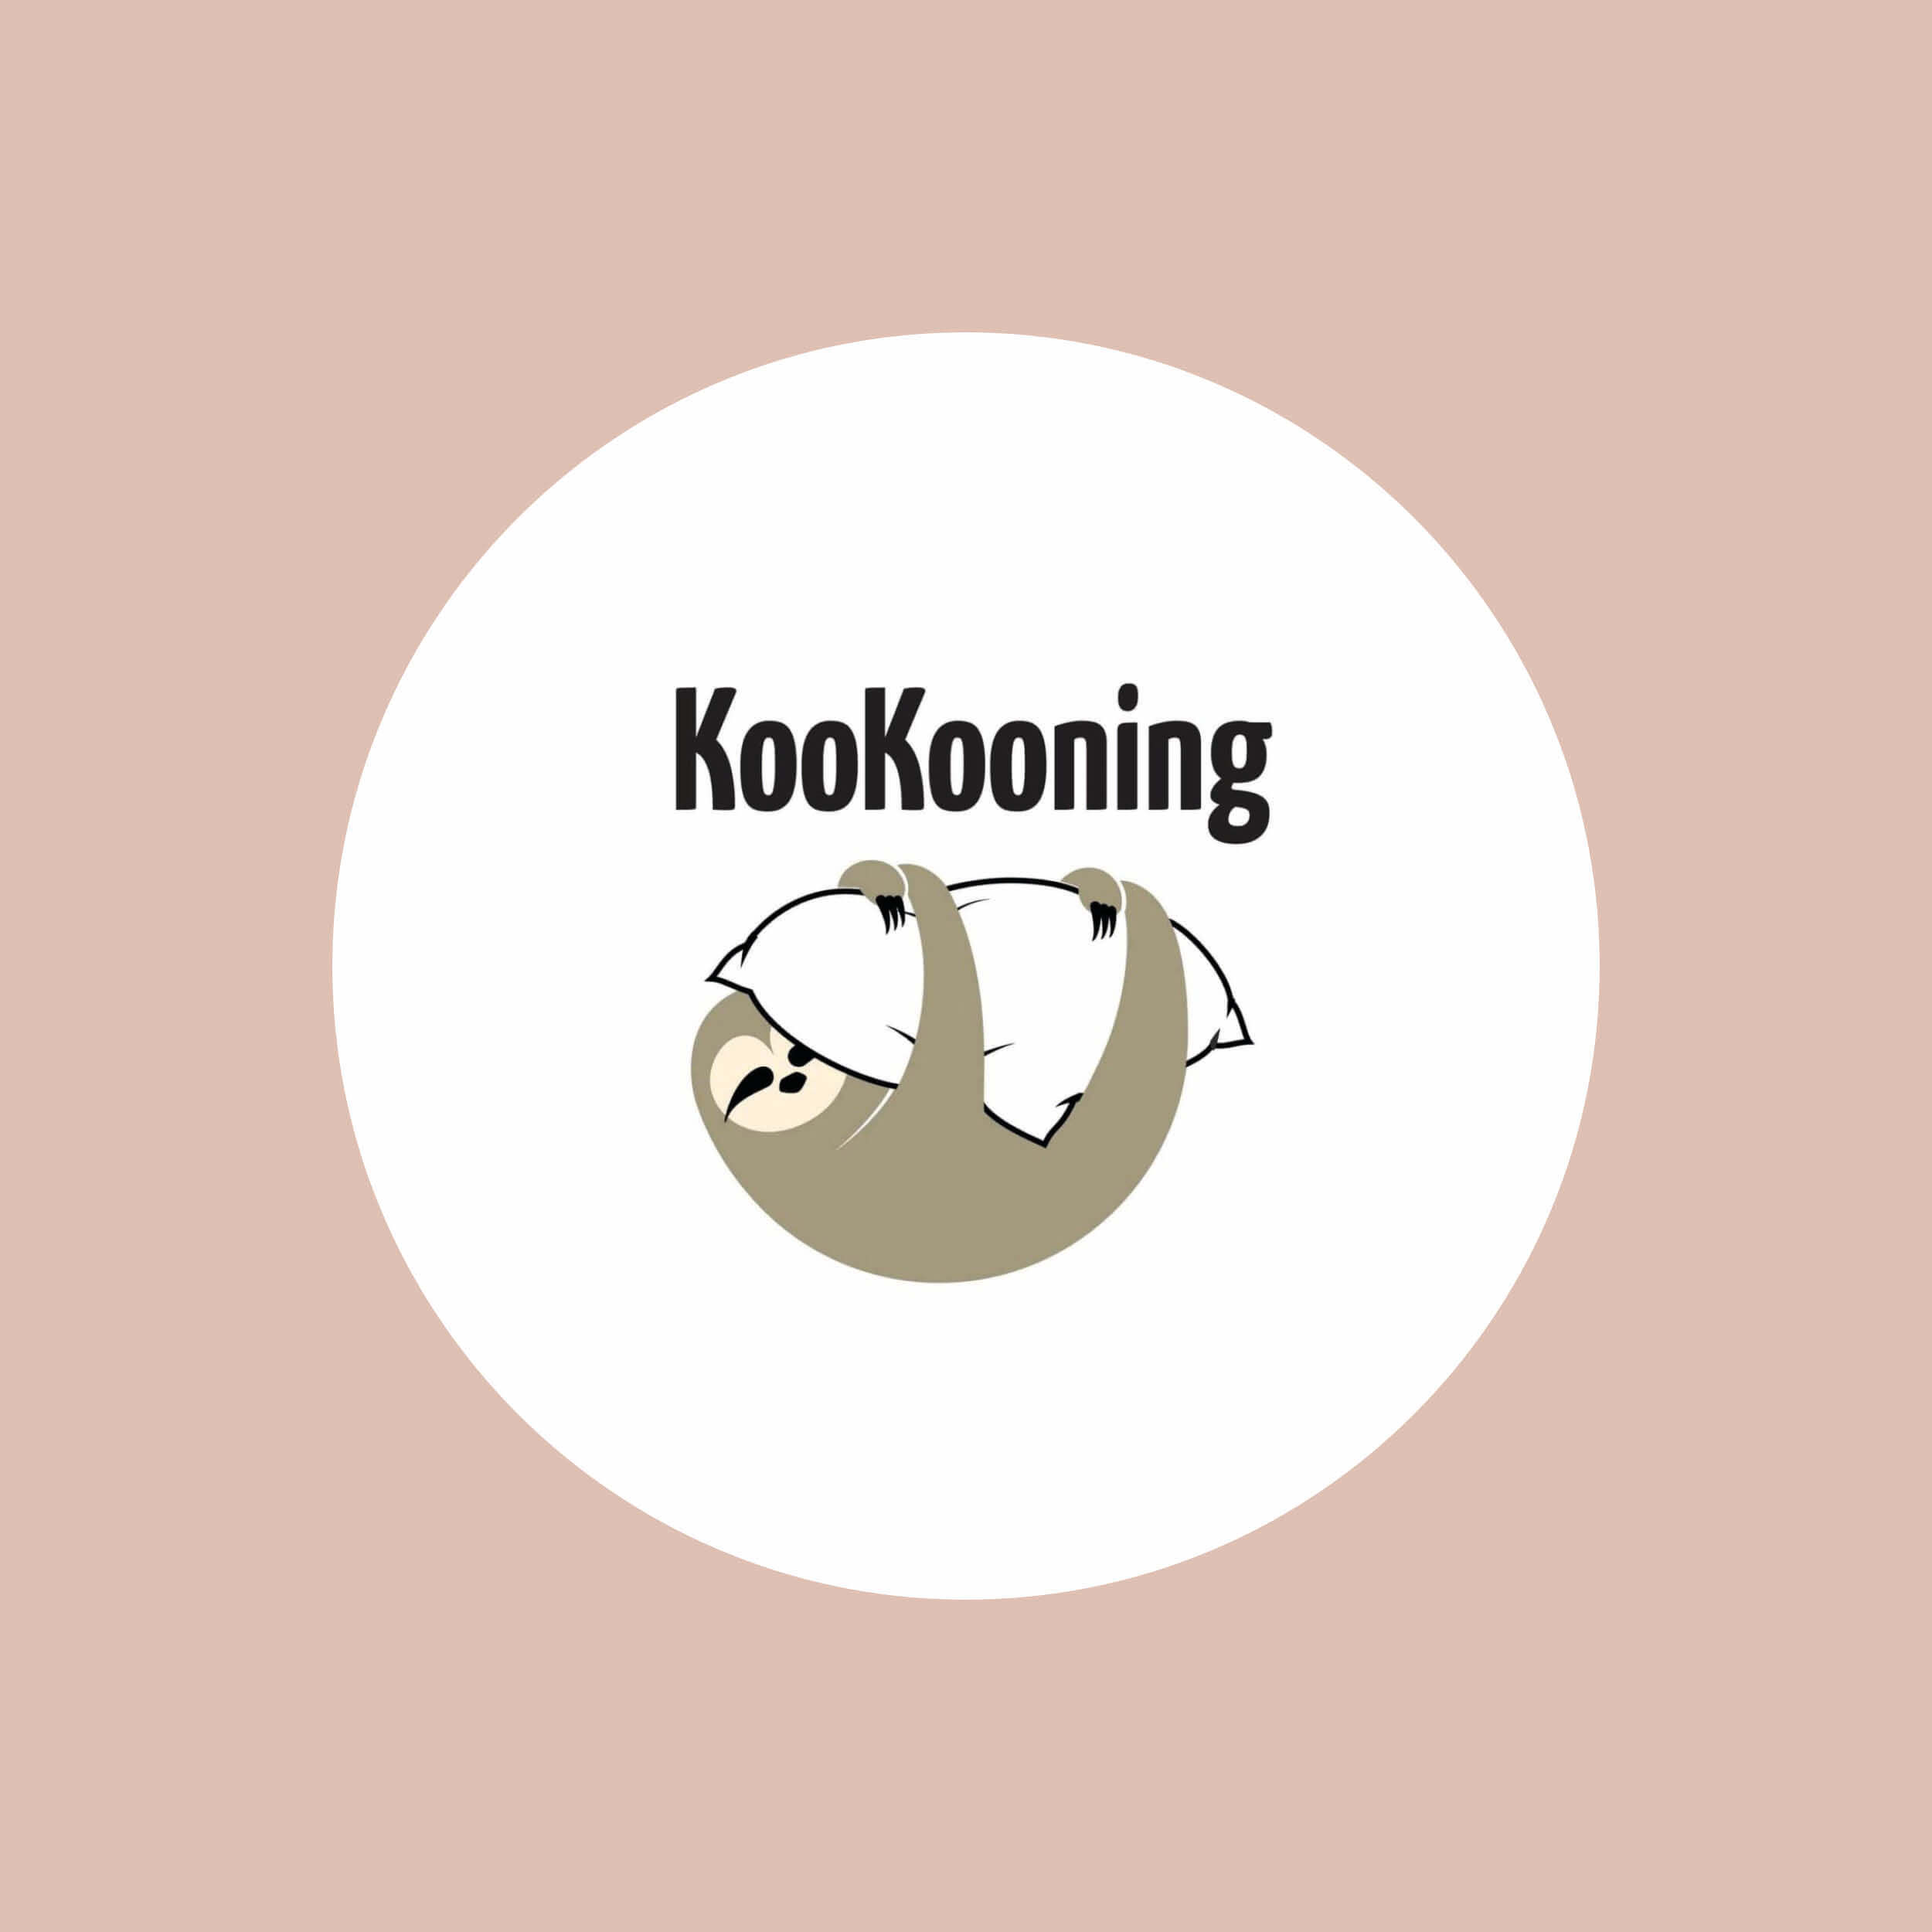 Kookoning – A different collaboration